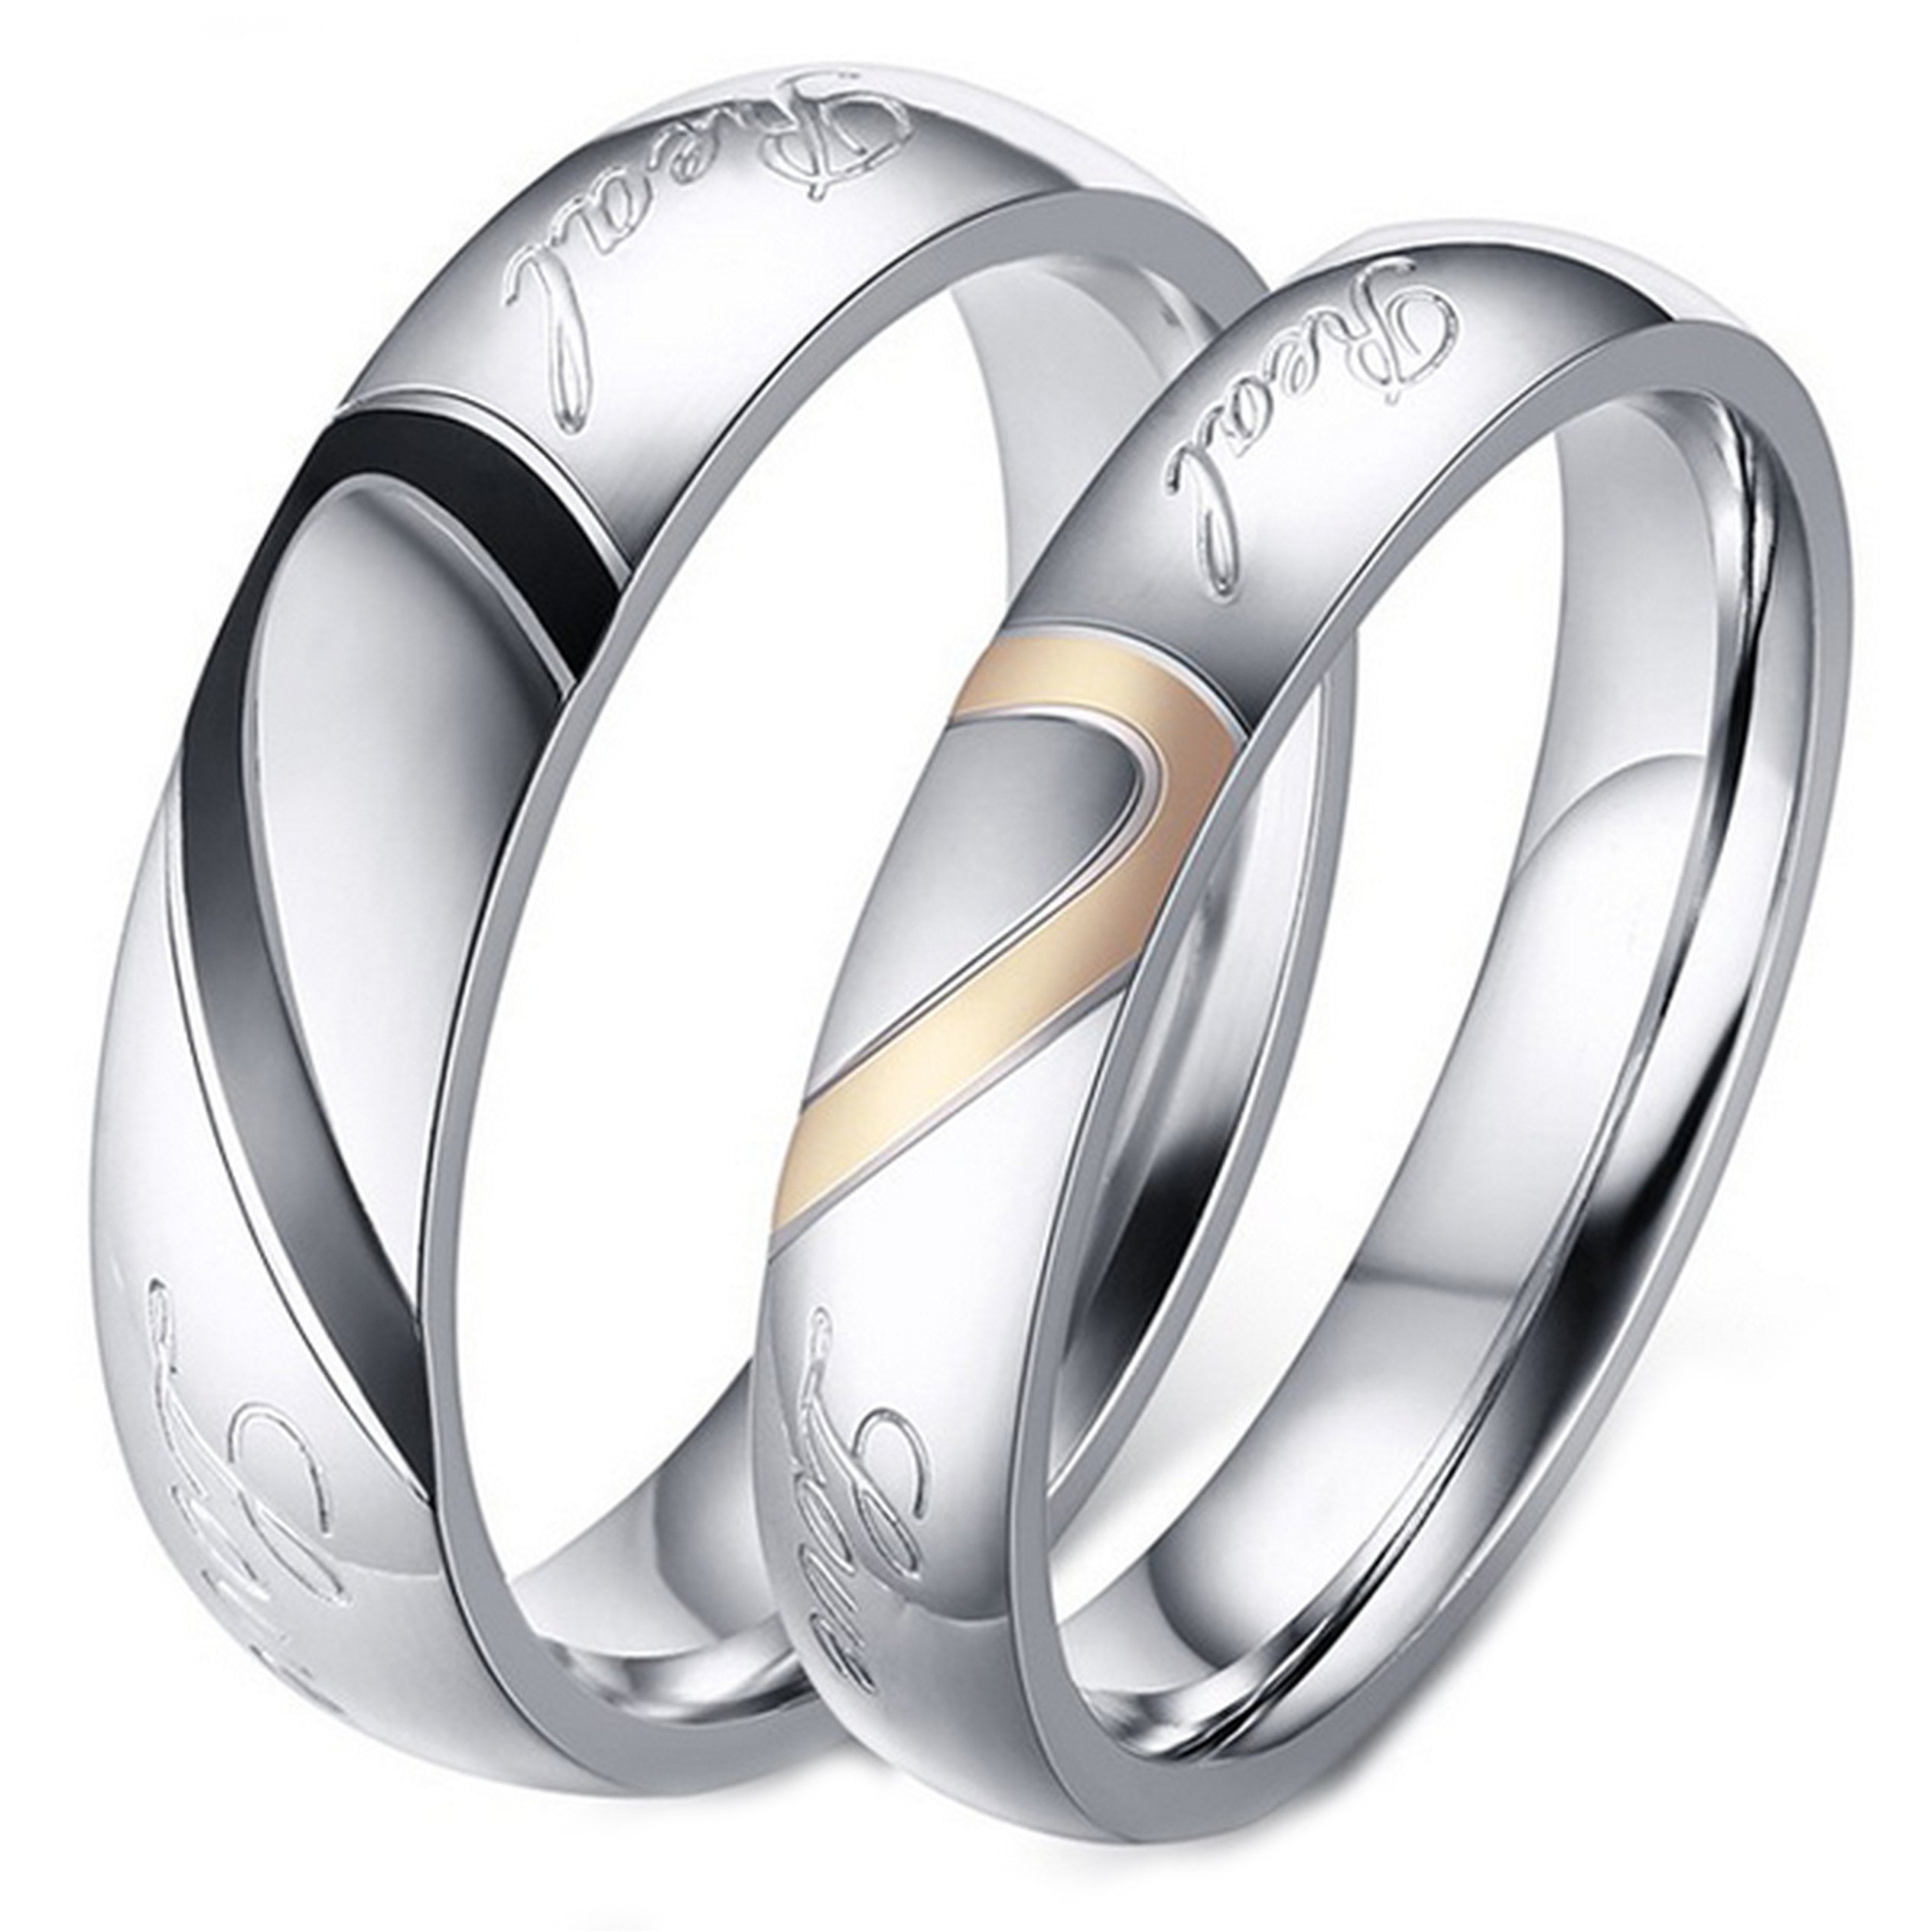 MoAndy Anniversary Ring Stainless Steel Ring Mens Womens Wedding Ring Plain Design